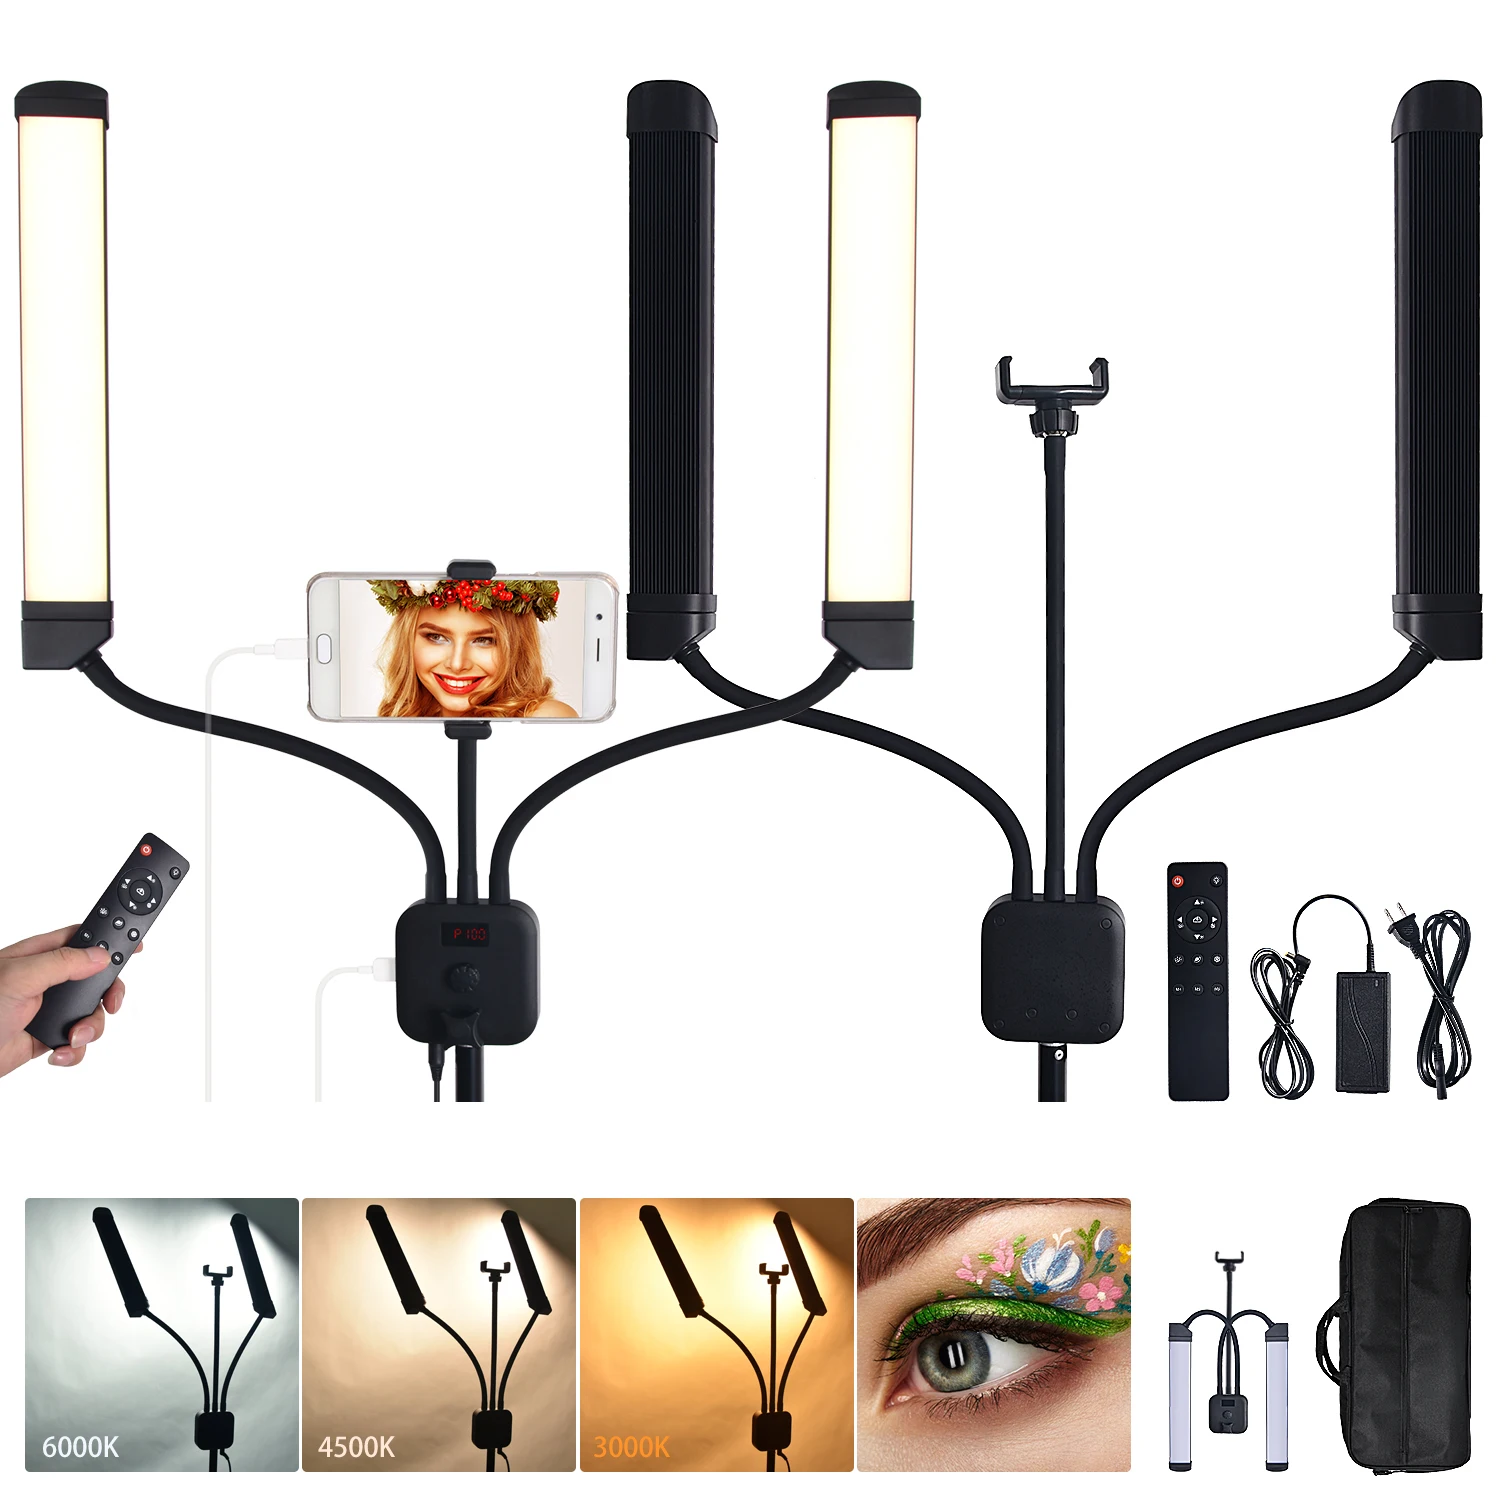 

Hot Sale Two Flexible LED Arms 40W Fill Photographic Light 3000K-6000K Dimming with Tripod Stand for Eyelash Tattoo Beauty